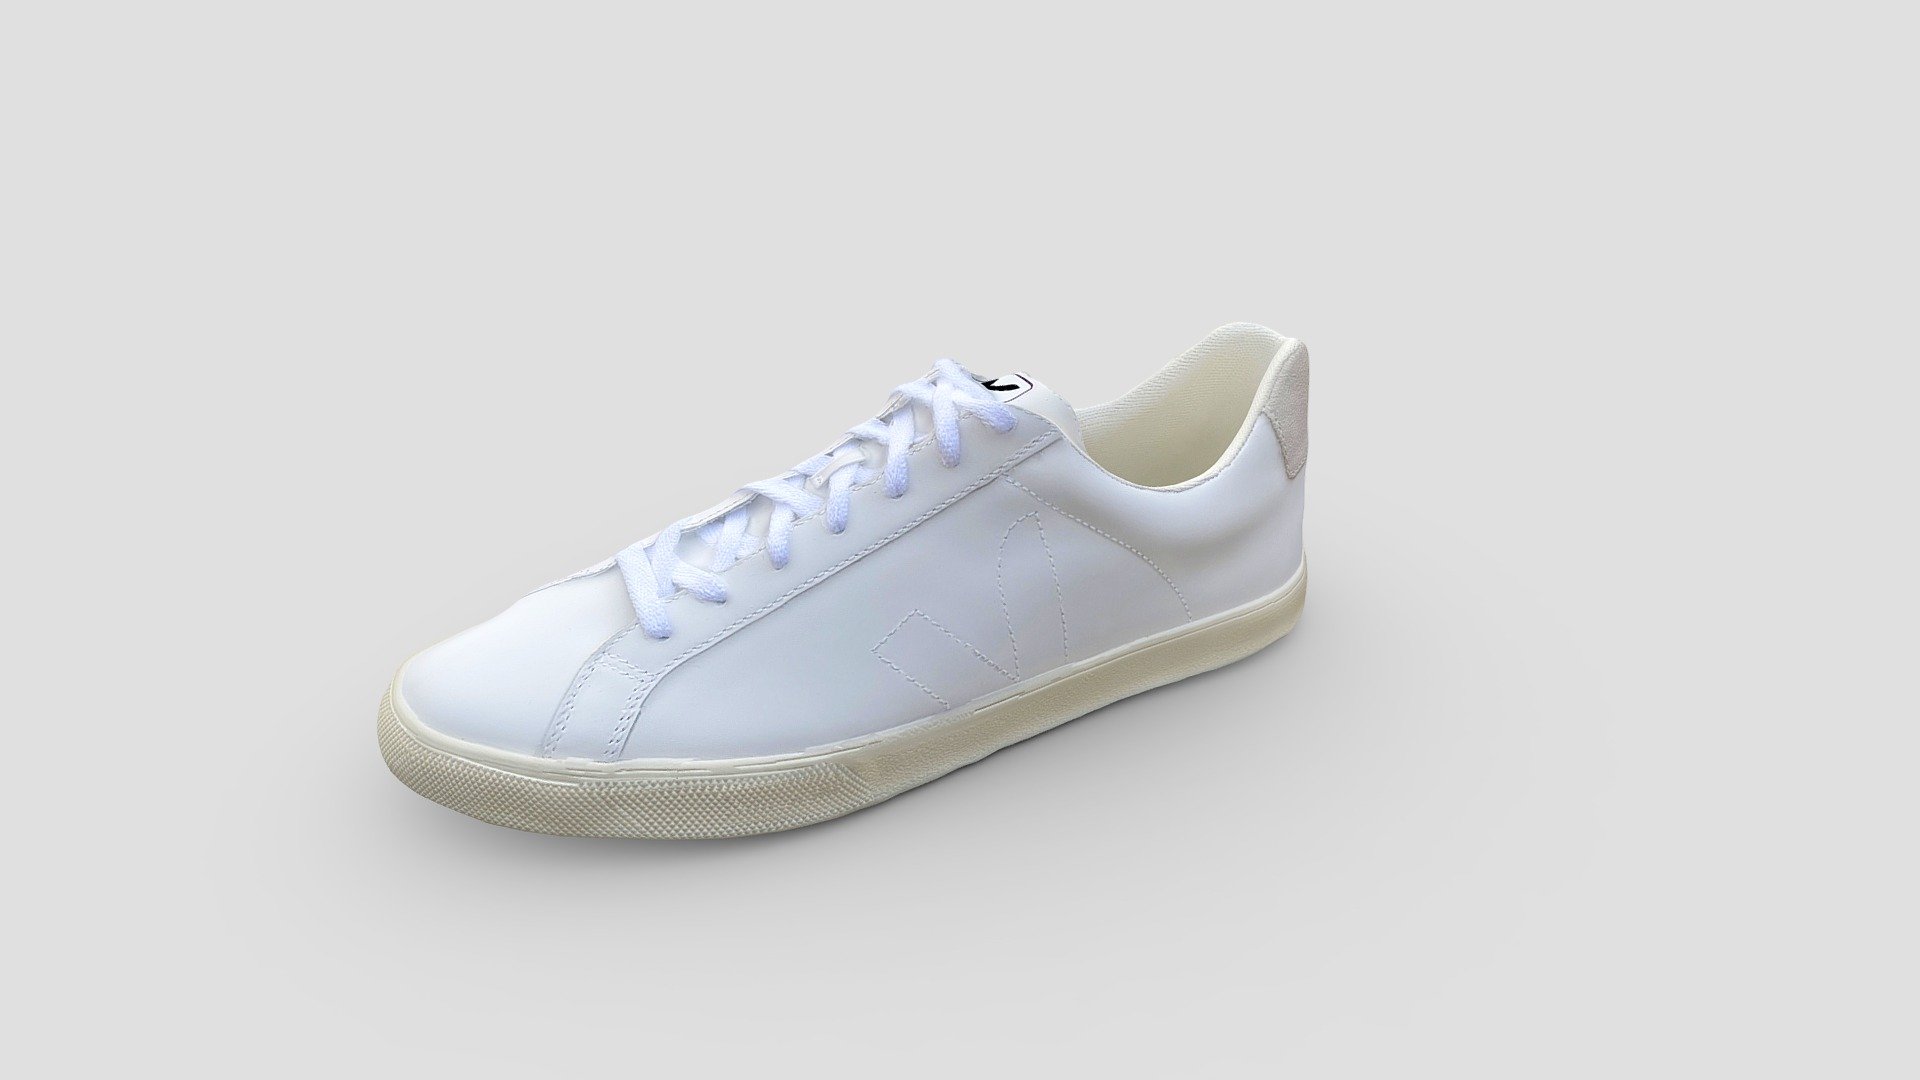 Finally used my Sketchfab Christmas gift card and bought a new pair of Veja sneakers, love them!

I got the same for my wife 2 years ago (scanned here https://skfb.ly/onGDw), this new scan turned out much better.

298 photos processed with metashape 3d model